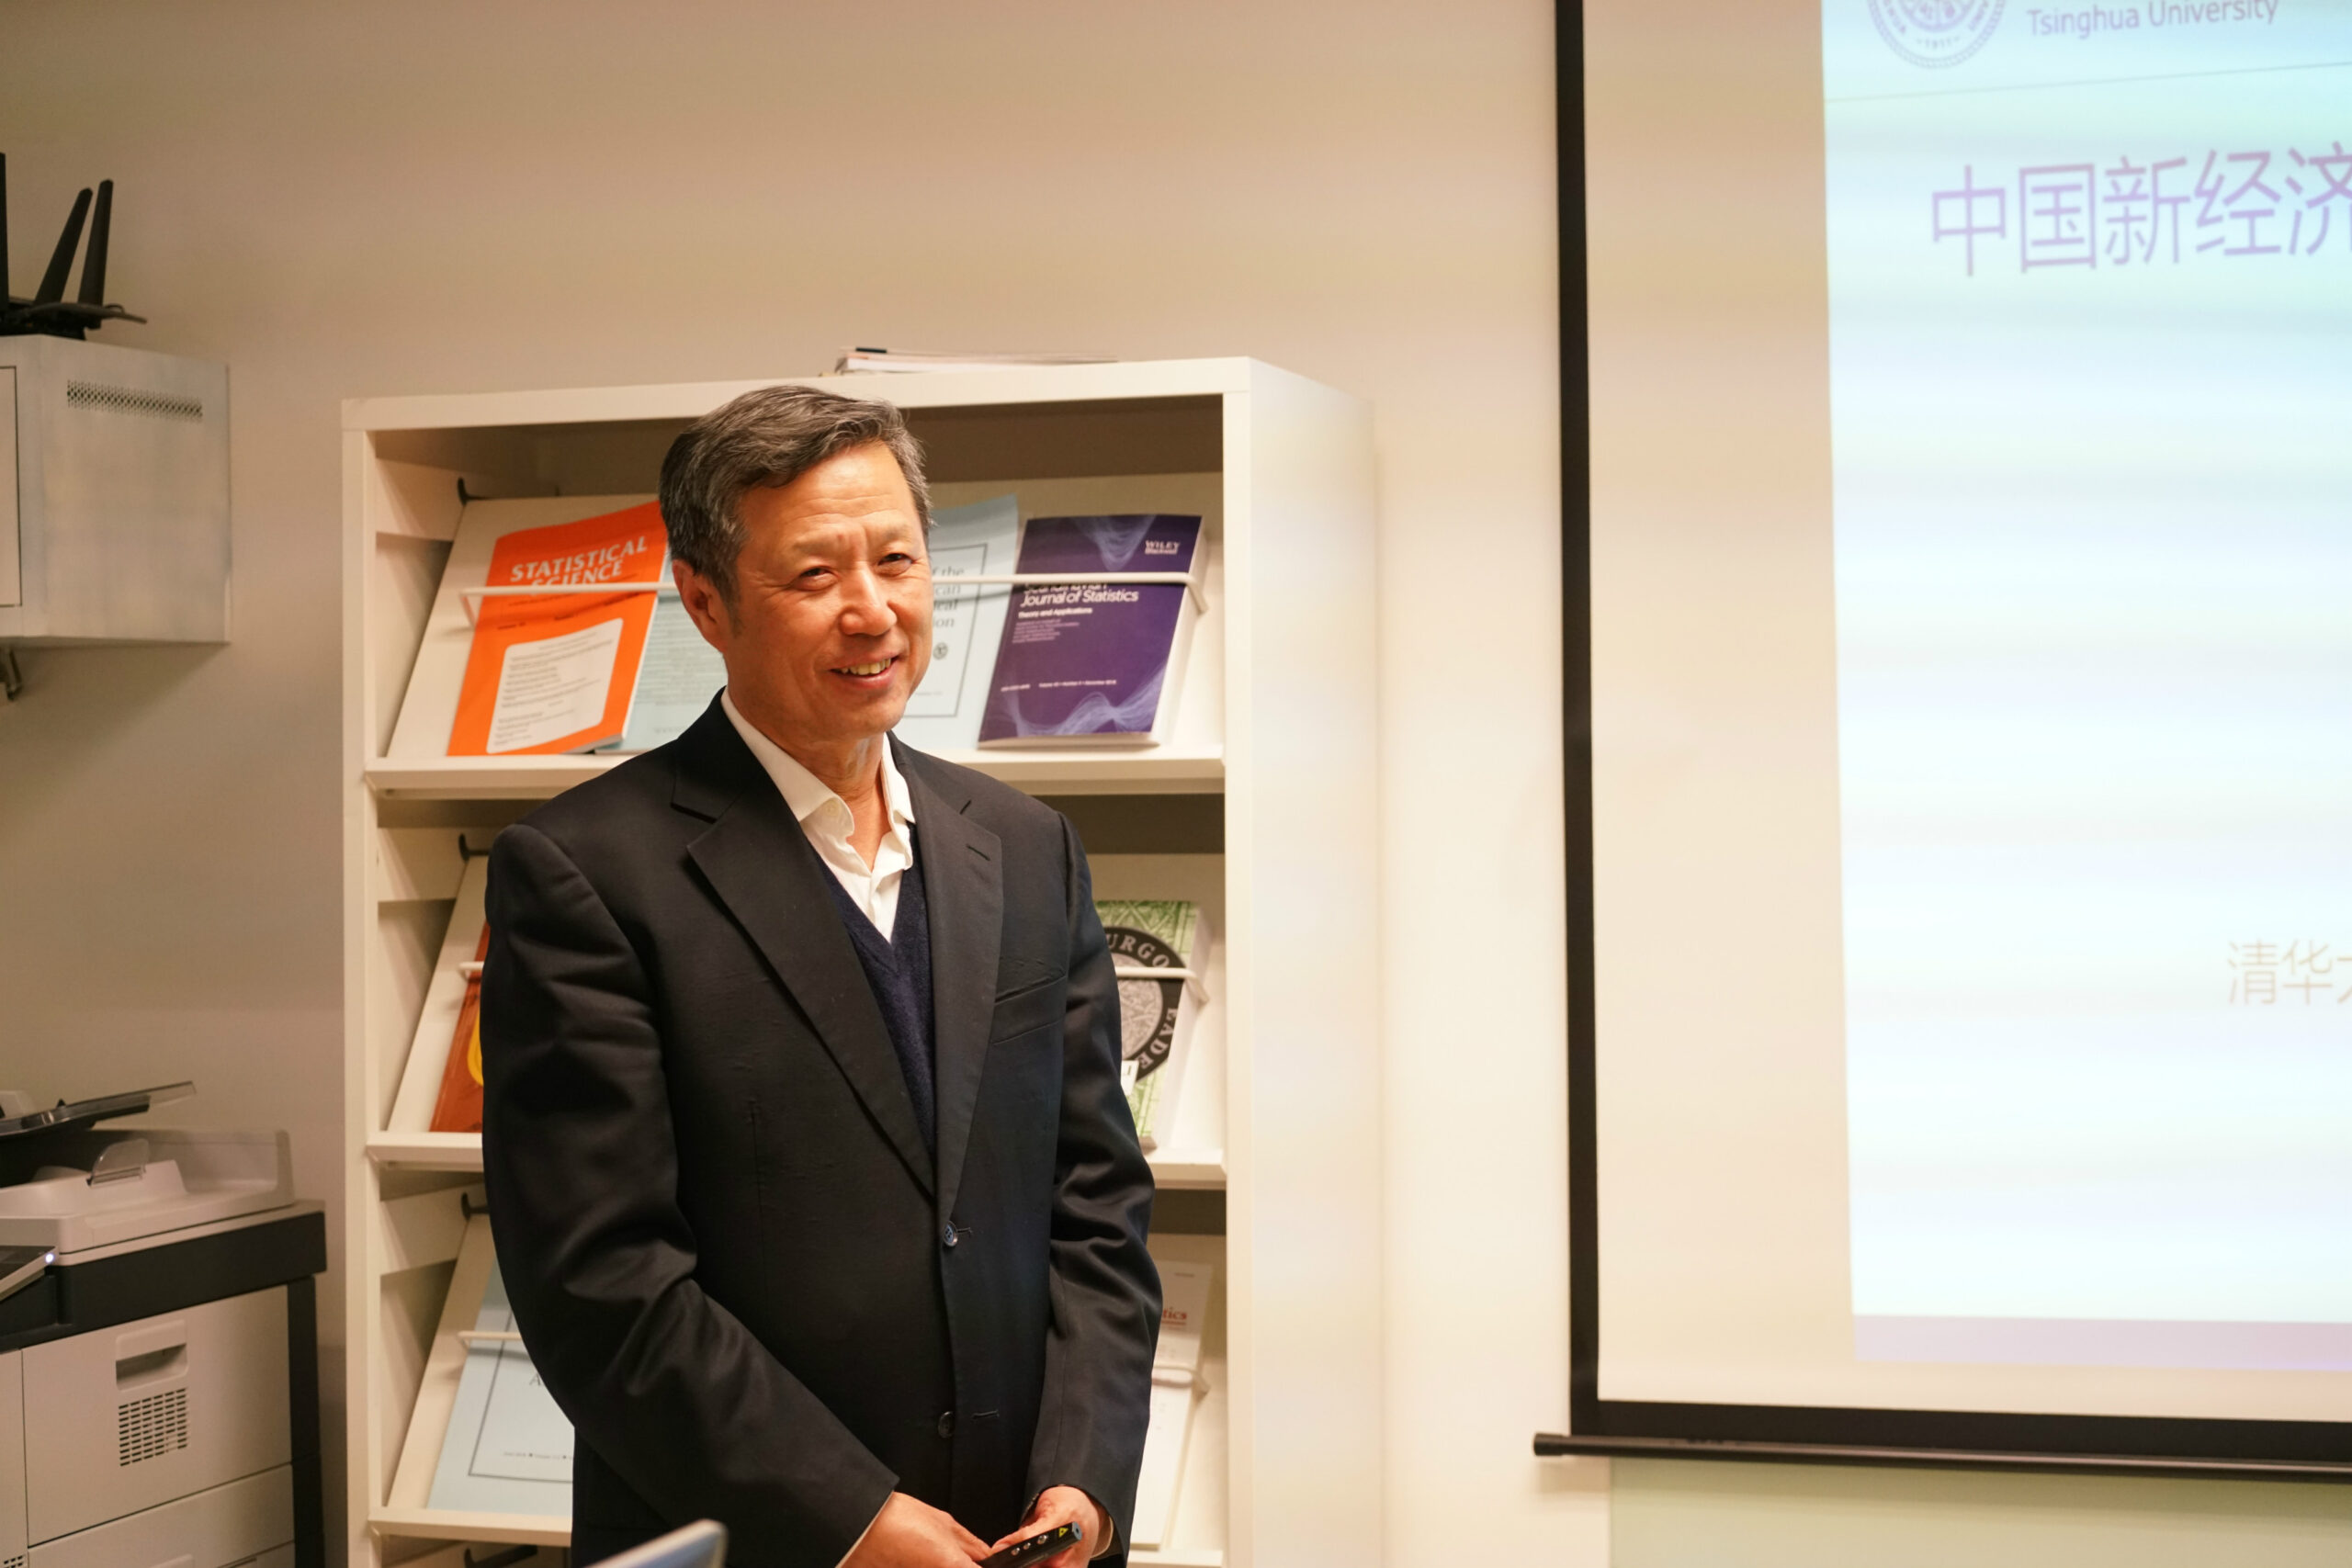 Professor Xianchun Xu from the School of Economics and Management of Tsinghua University Visited the Center and Gave a Special Talk